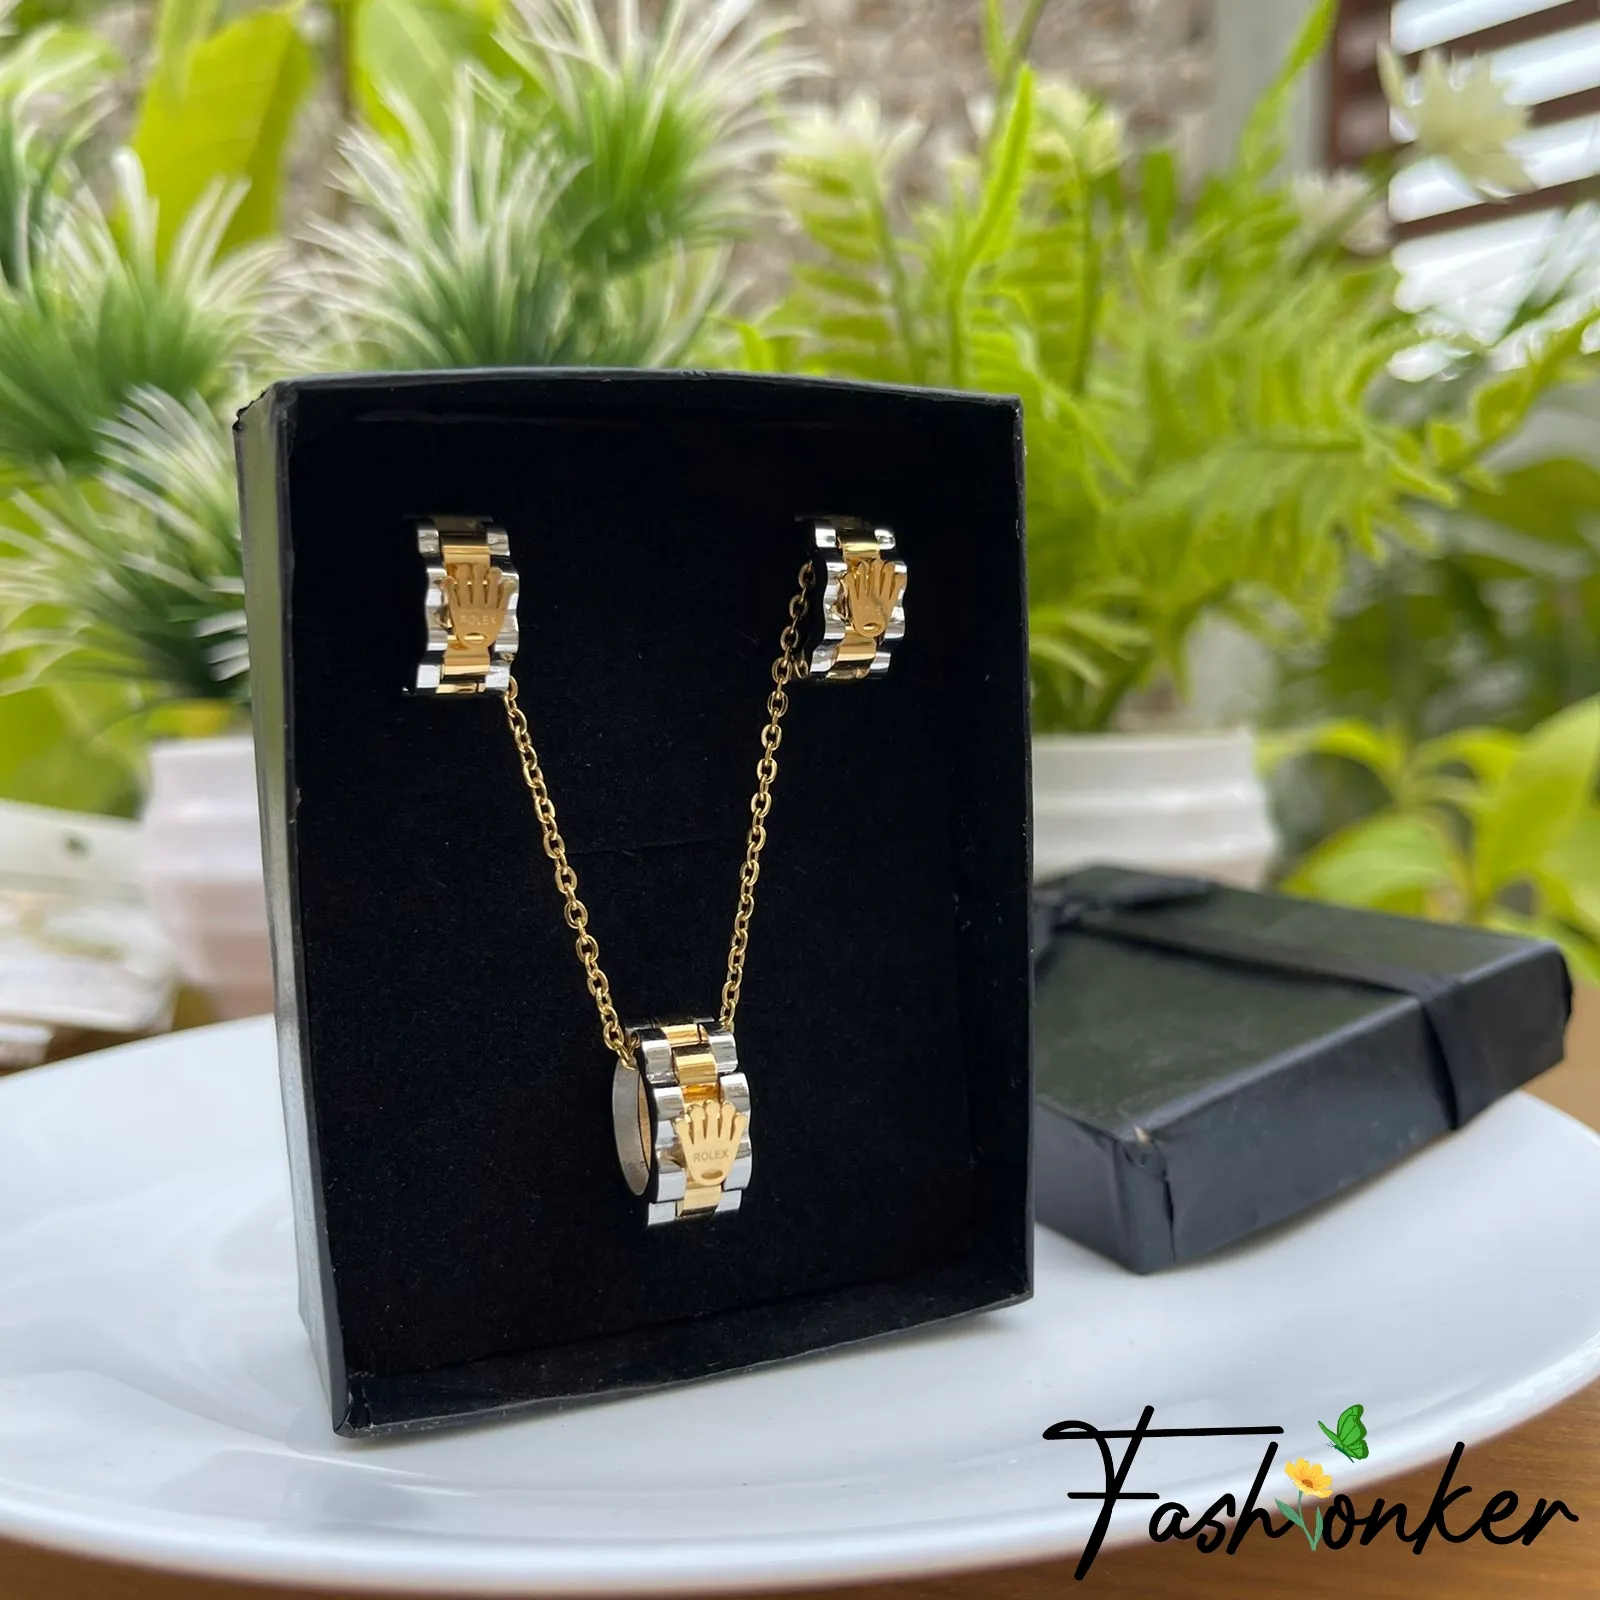 Best Price Rolex Chain Pendant with earrings